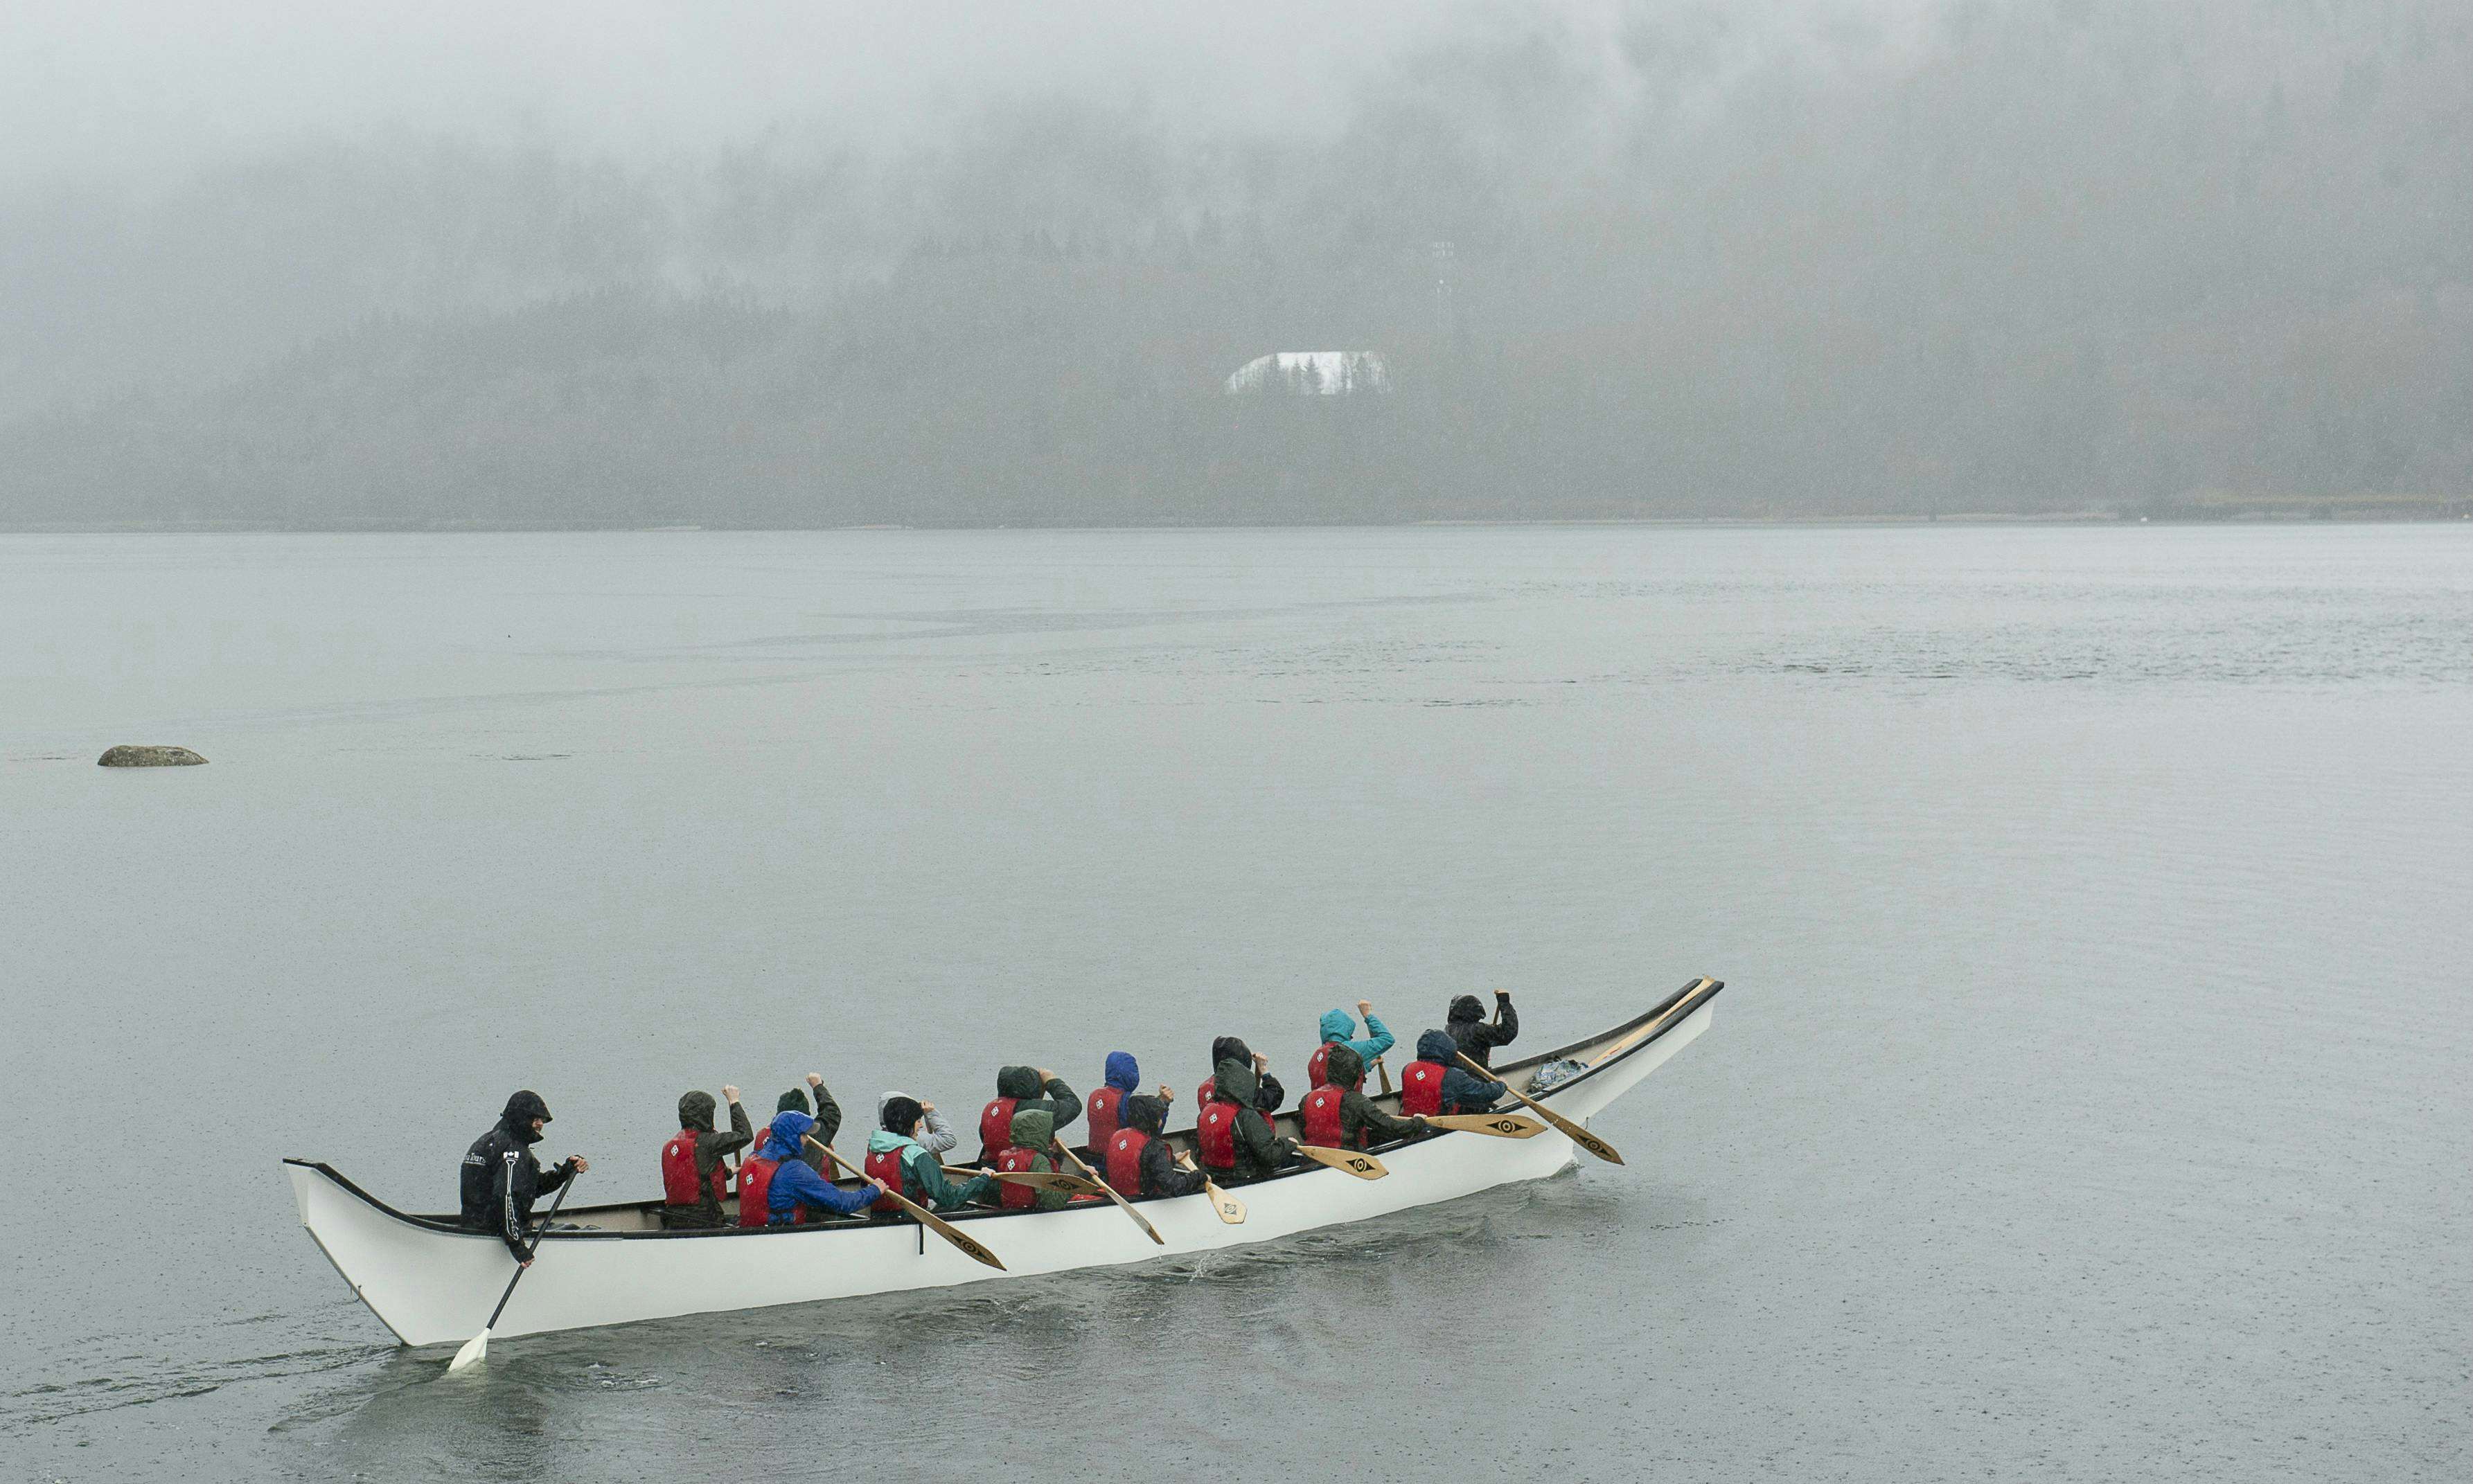 A group of girls paddles a large canoe across an ocean inlet.